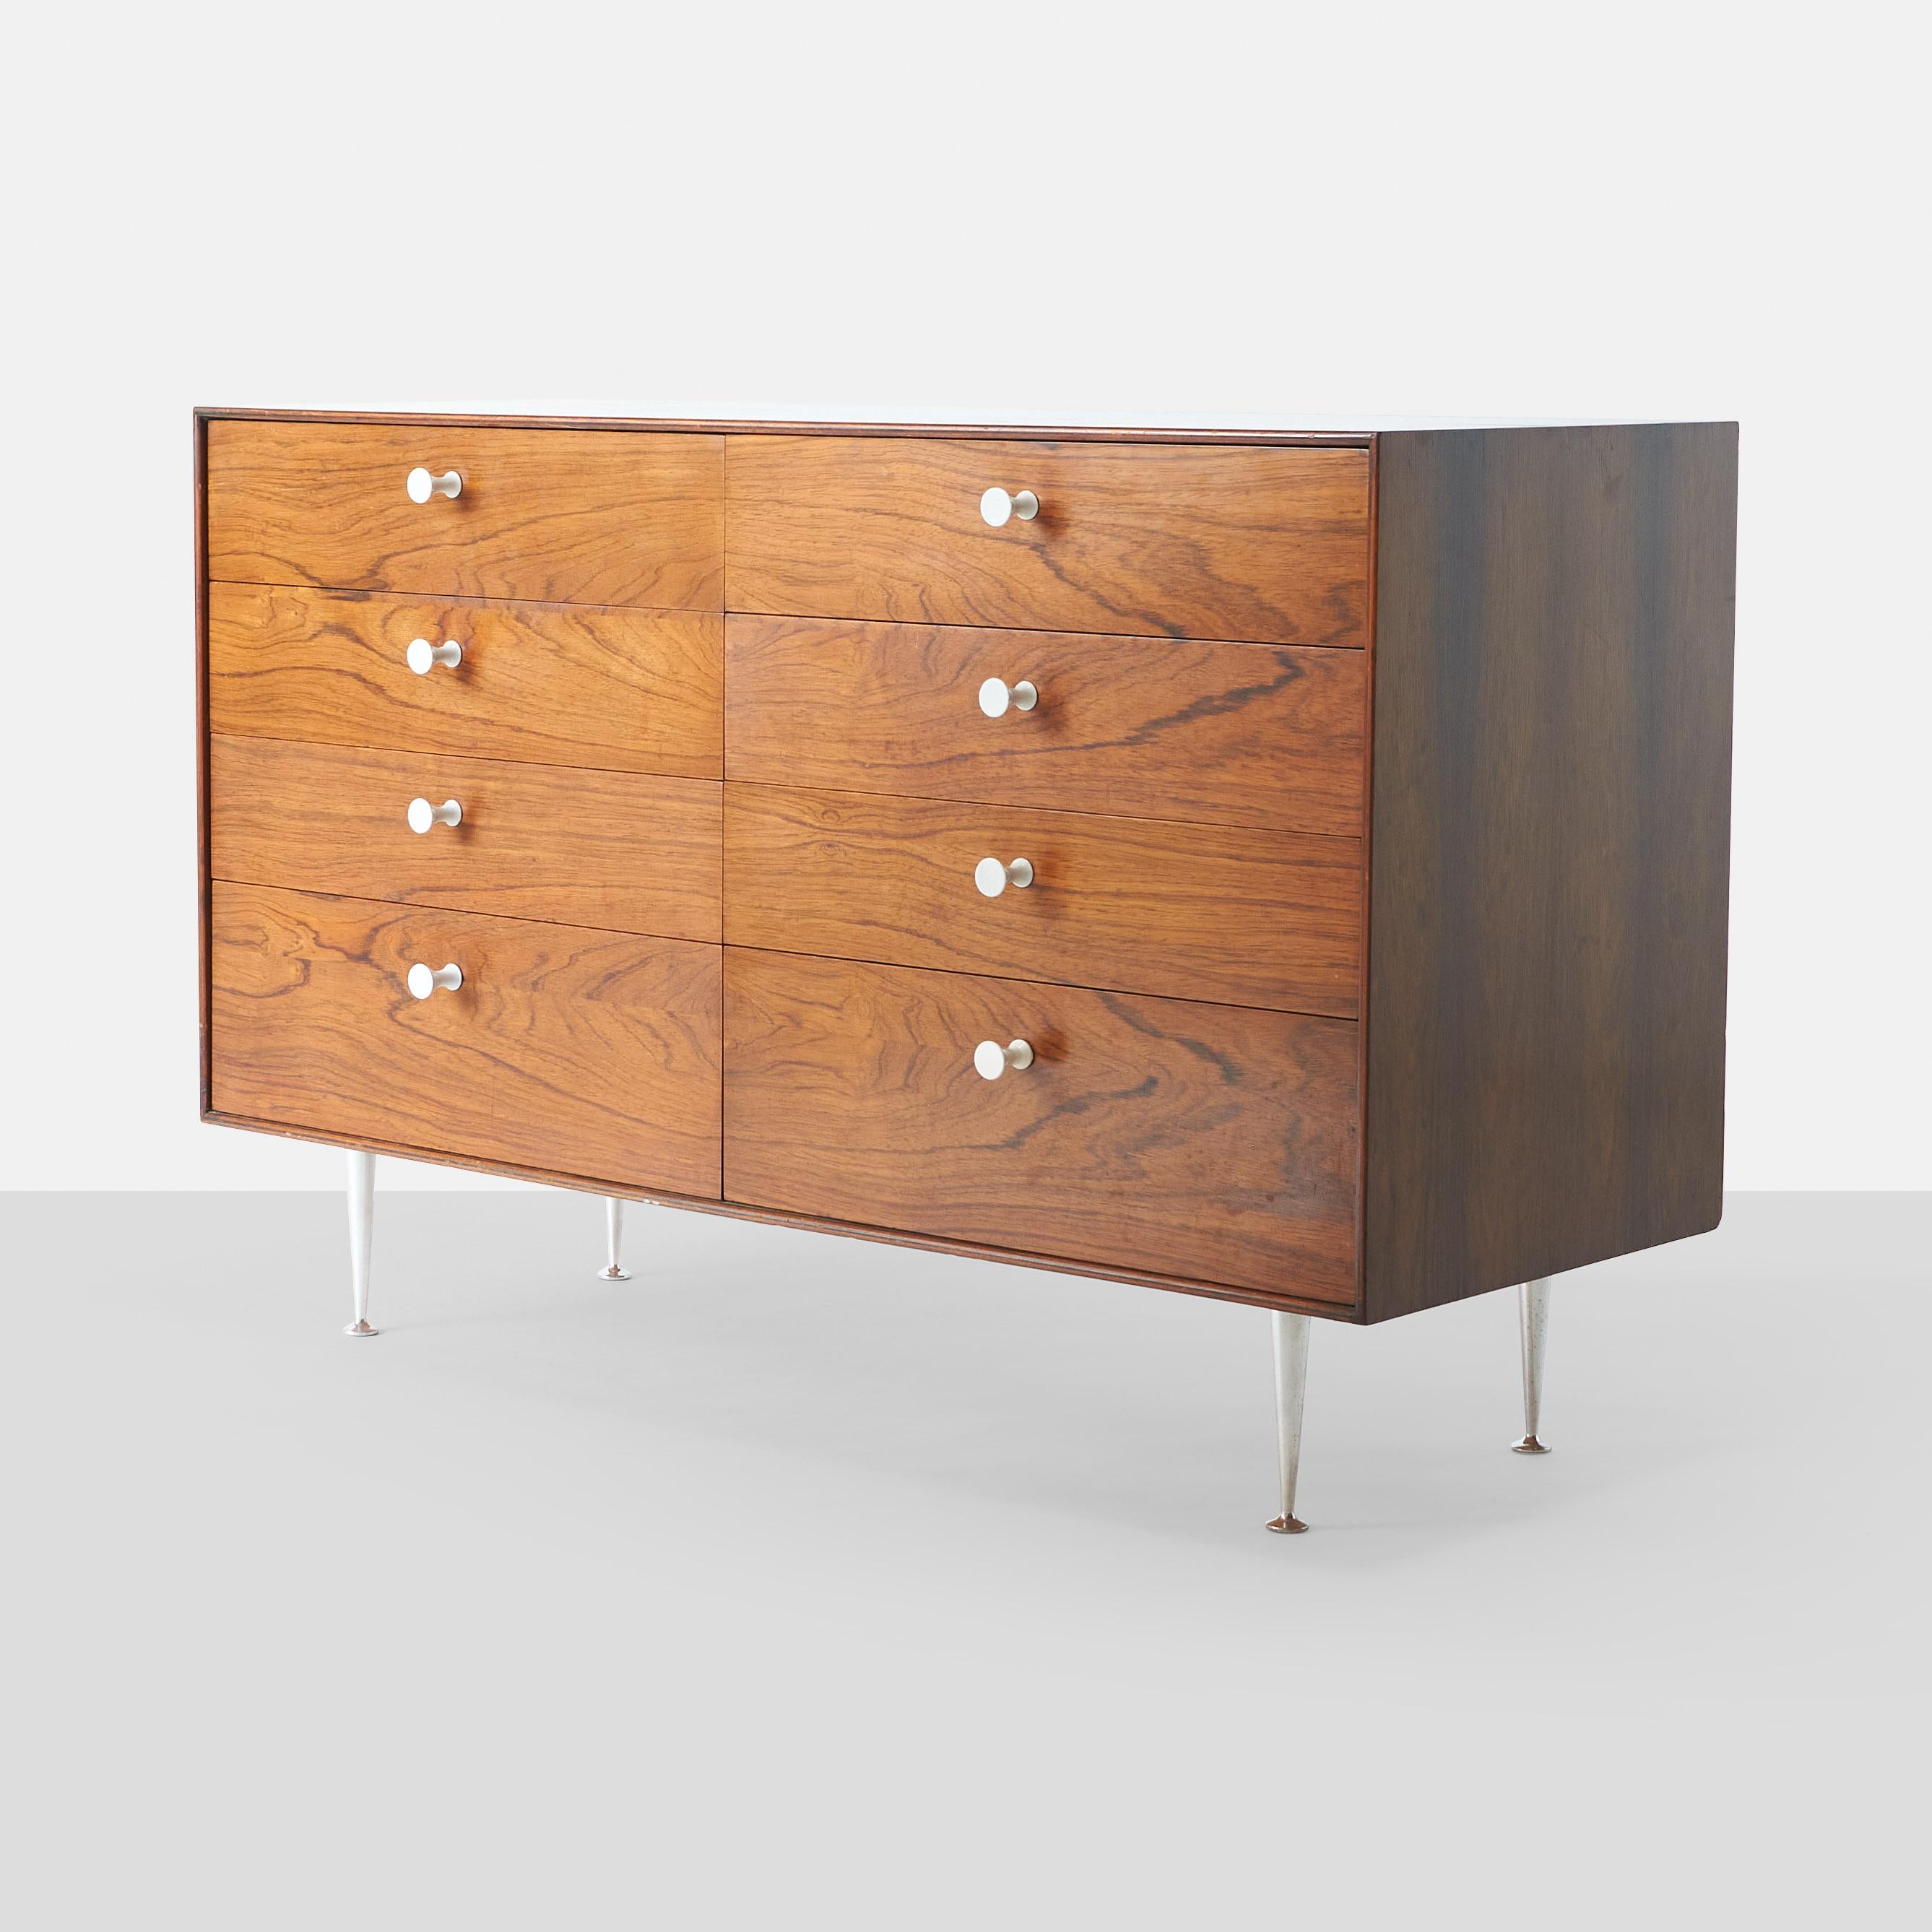 A chest of drawers by George Nelson for Herman Miller in rosewood, with porcelain knobs and aluminum fluted legs. The top drawers have dividers.

Retains the manufacturer’s label.[George Nelson Design Herman Miller Zeeland Michigan].